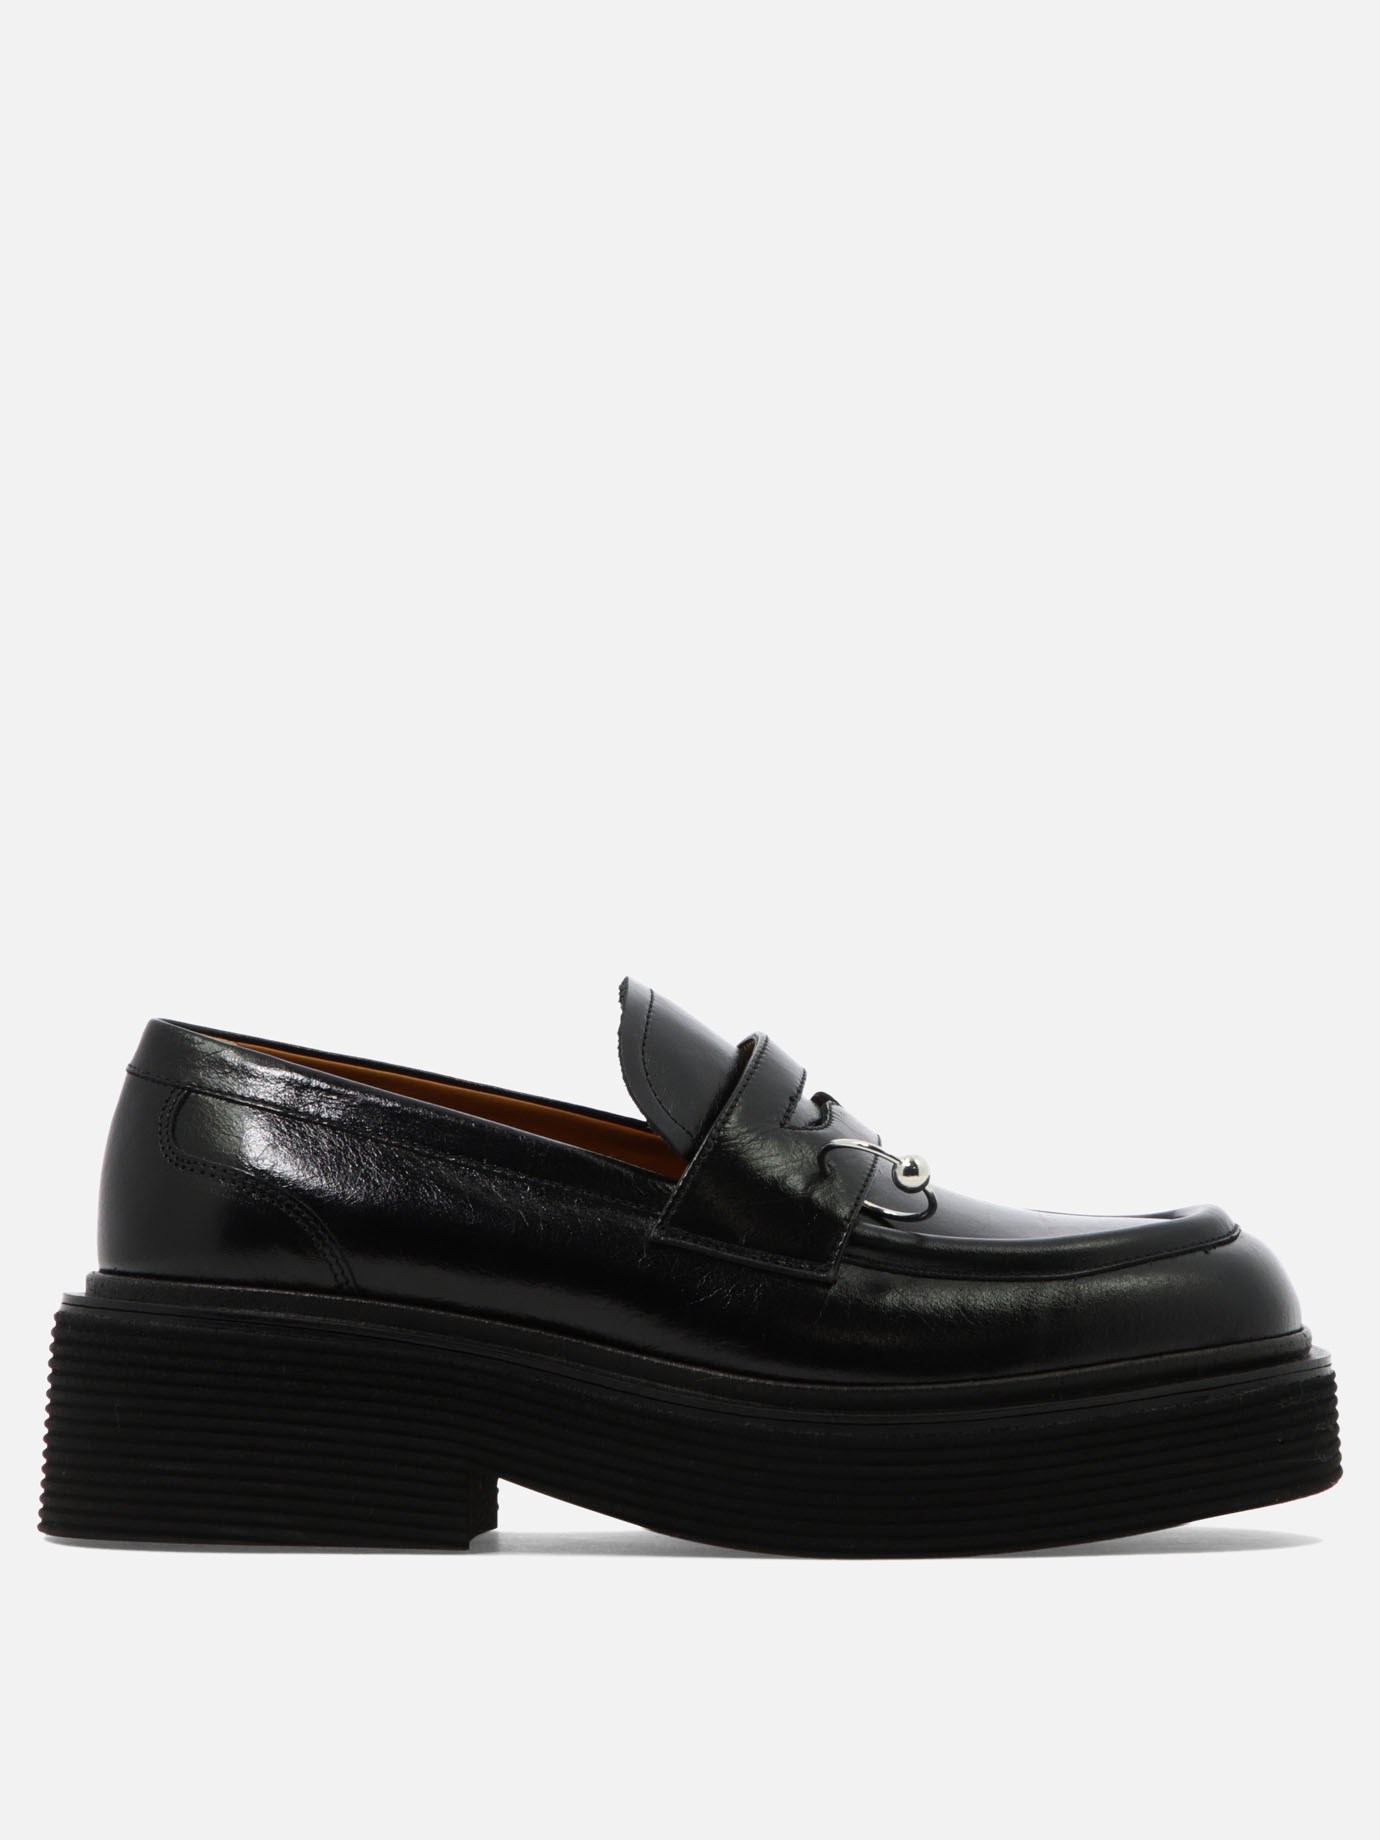  Piercing  loafersby Marni - 3